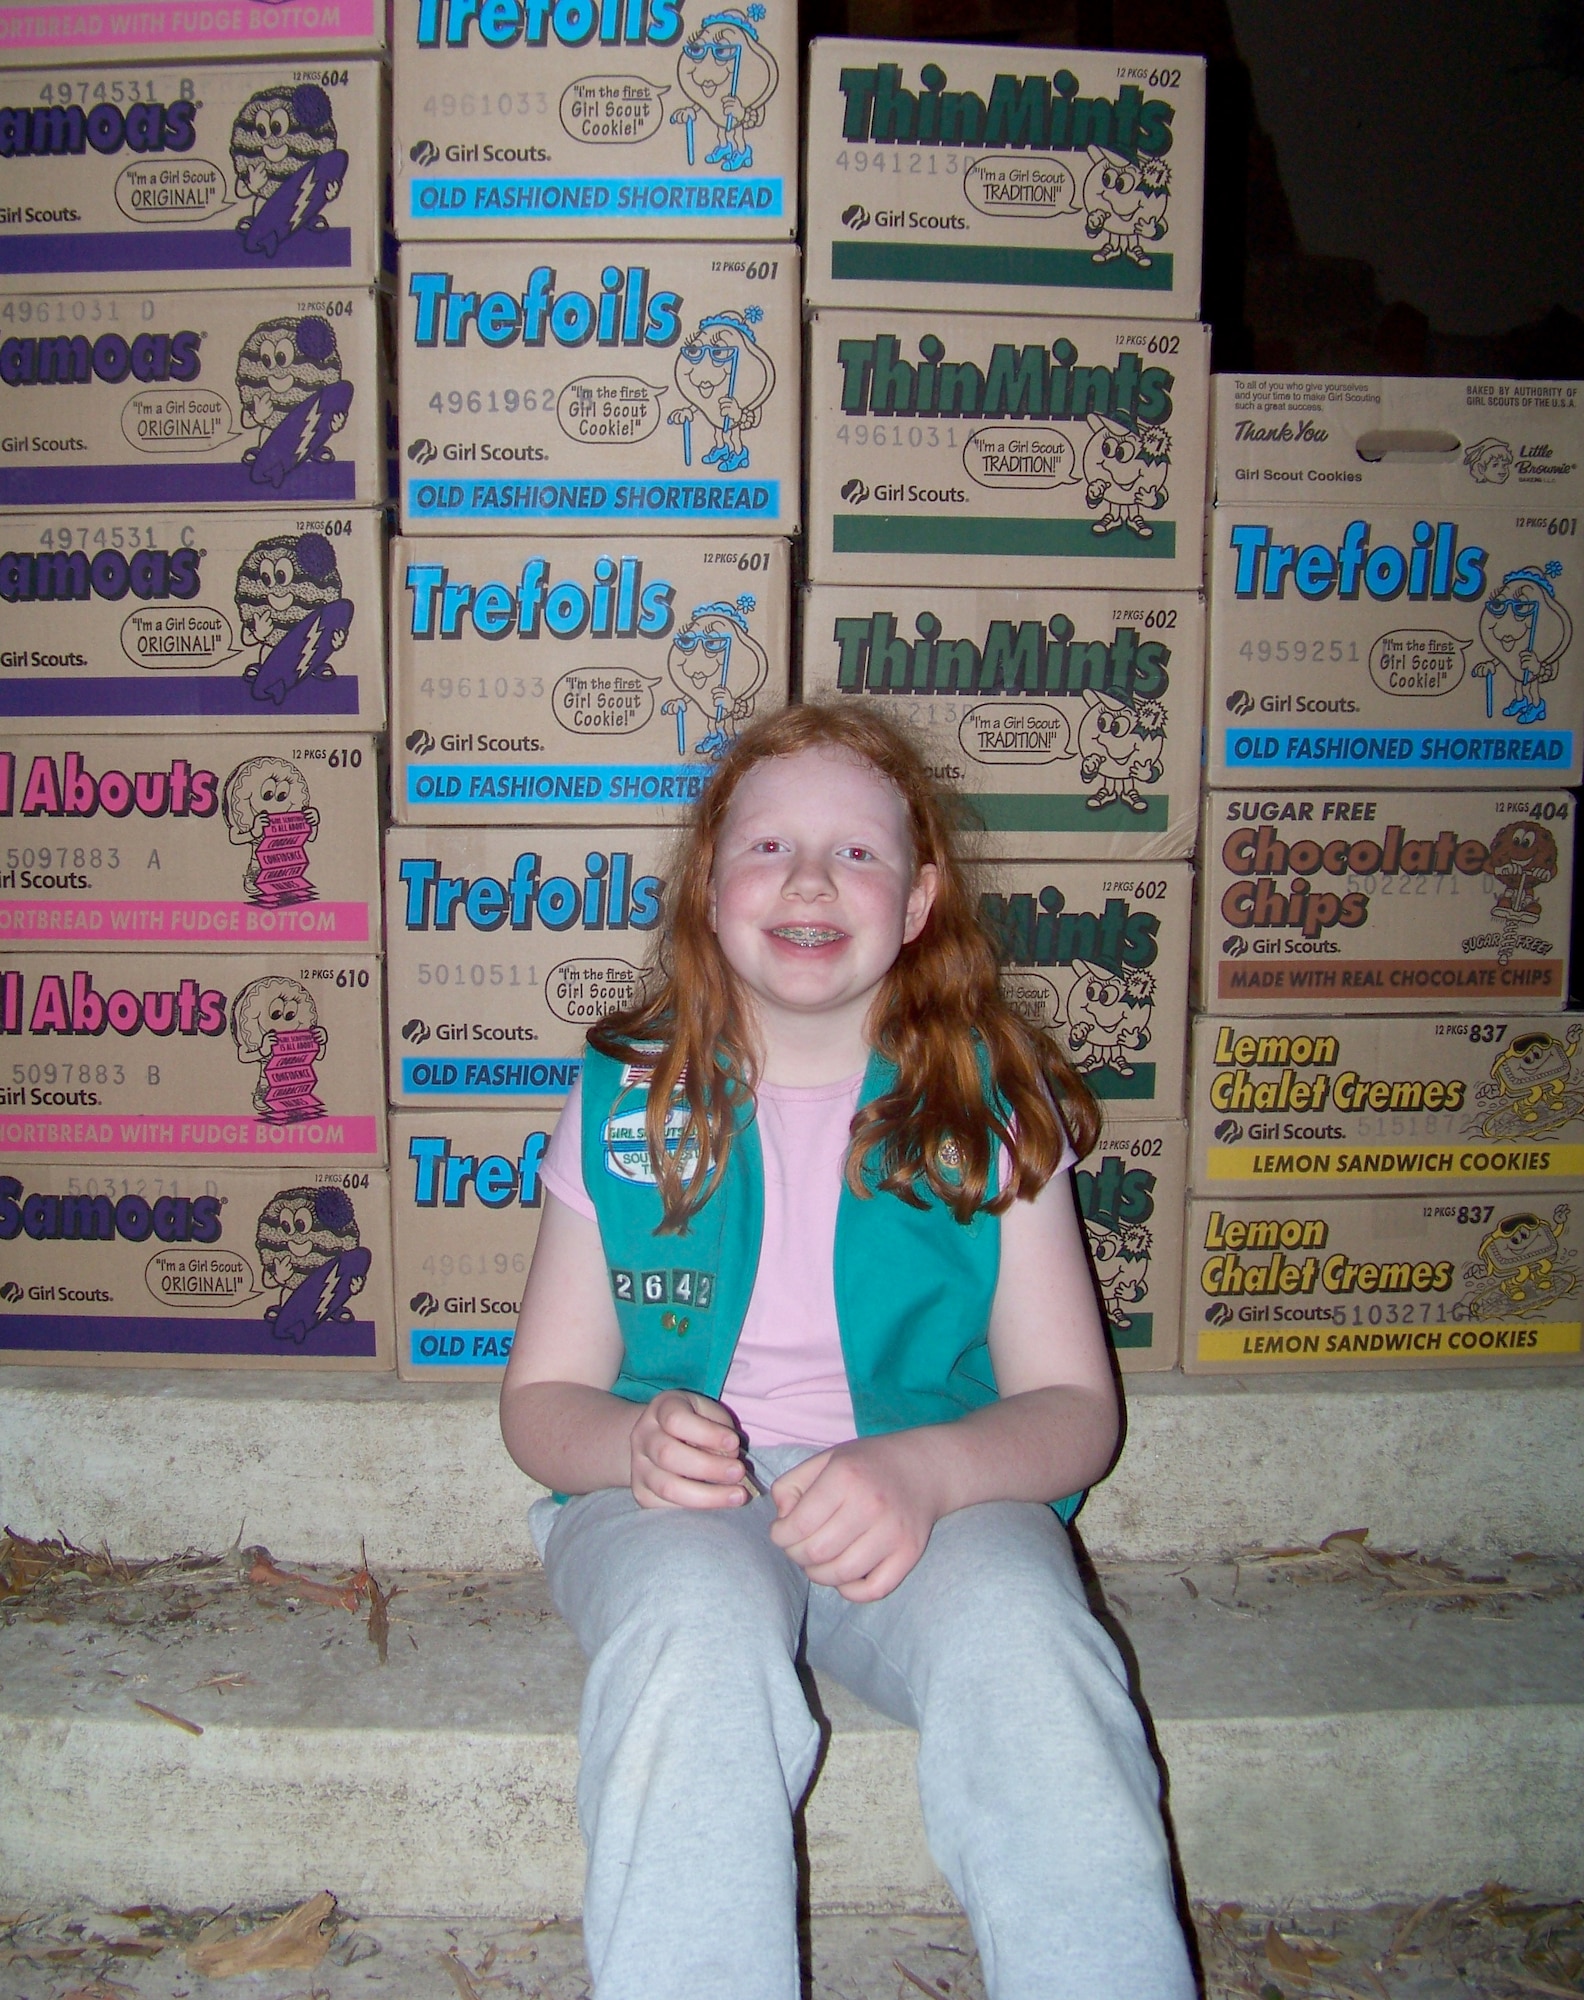 Madison Albrecht, 11, recently collected more than 200 boxes of Girl Scout cookie donations for troops overseas. (Courtesy photo)
